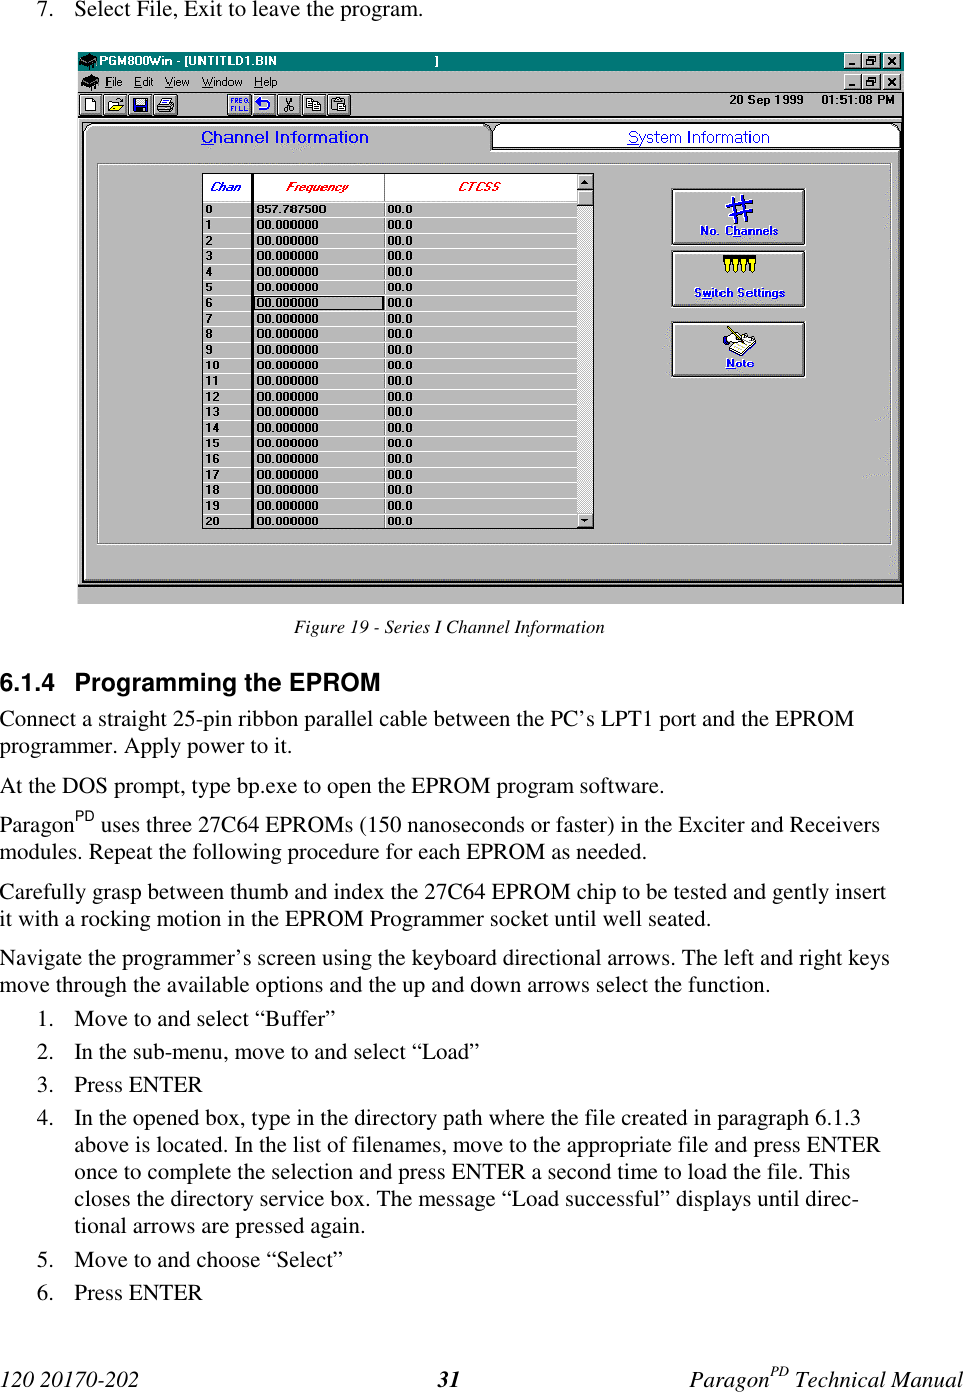 120 20170-202 ParagonPD Technical Manual317. Select File, Exit to leave the program.Figure 19 - Series I Channel Information6.1.4  Programming the EPROMConnect a straight 25-pin ribbon parallel cable between the PC’s LPT1 port and the EPROMprogrammer. Apply power to it.At the DOS prompt, type bp.exe to open the EPROM program software.ParagonPD uses three 27C64 EPROMs (150 nanoseconds or faster) in the Exciter and Receiversmodules. Repeat the following procedure for each EPROM as needed.Carefully grasp between thumb and index the 27C64 EPROM chip to be tested and gently insertit with a rocking motion in the EPROM Programmer socket until well seated.Navigate the programmer’s screen using the keyboard directional arrows. The left and right keysmove through the available options and the up and down arrows select the function.1. Move to and select “Buffer”2. In the sub-menu, move to and select “Load”3. Press ENTER4. In the opened box, type in the directory path where the file created in paragraph 6.1.3above is located. In the list of filenames, move to the appropriate file and press ENTERonce to complete the selection and press ENTER a second time to load the file. Thiscloses the directory service box. The message “Load successful” displays until direc-tional arrows are pressed again.5. Move to and choose “Select”6. Press ENTER